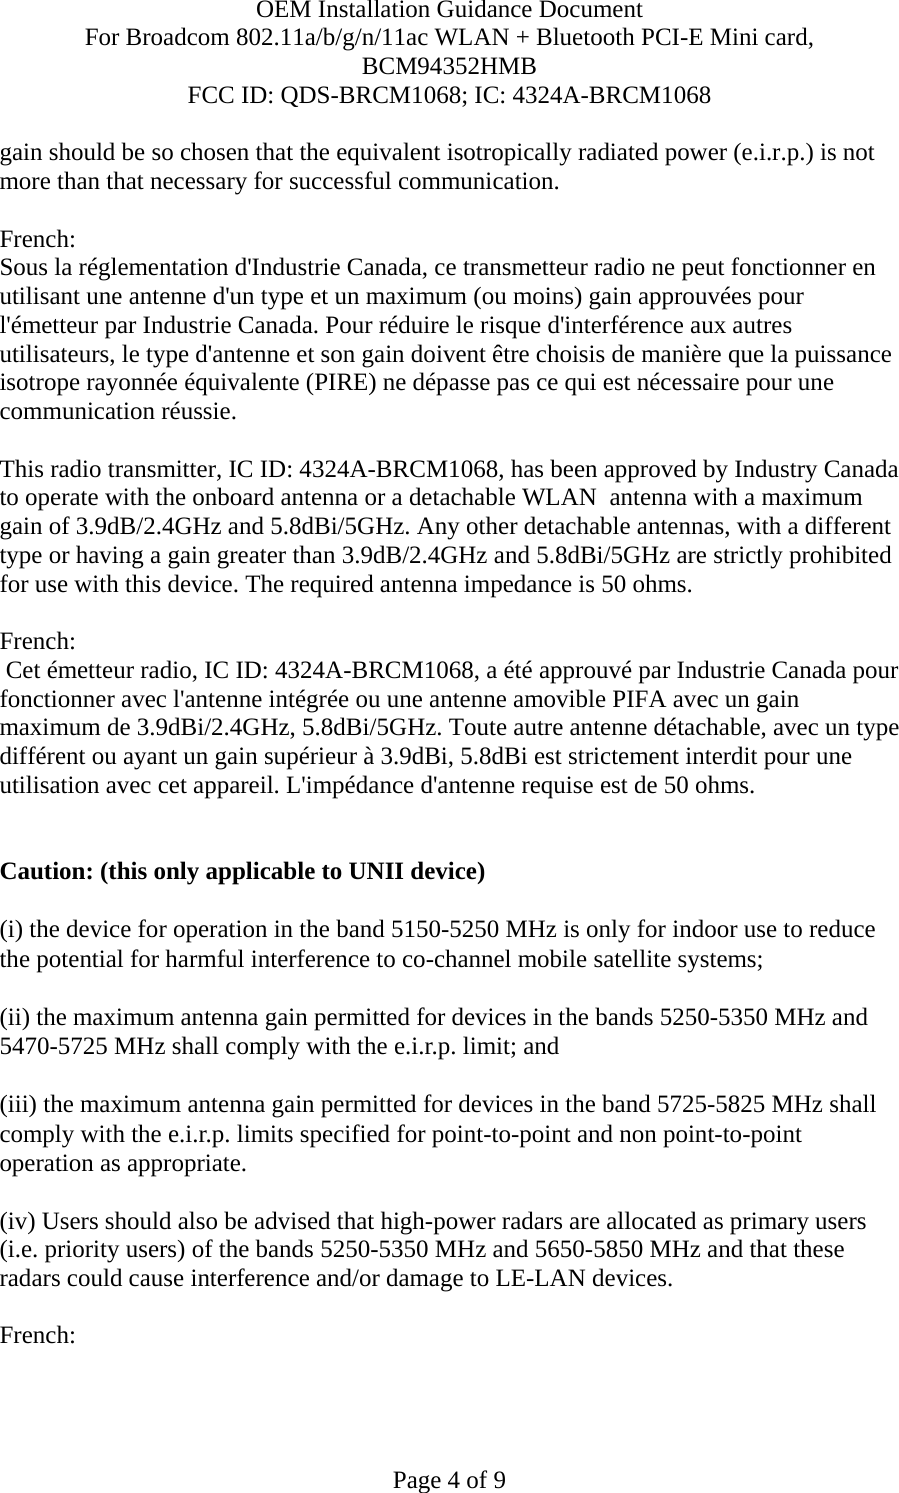 OEM Installation Guidance Document For Broadcom 802.11a/b/g/n/11ac WLAN + Bluetooth PCI-E Mini card, BCM94352HMB FCC ID: QDS-BRCM1068; IC: 4324A-BRCM1068  Page 4 of 9 gain should be so chosen that the equivalent isotropically radiated power (e.i.r.p.) is not more than that necessary for successful communication.  French:  Sous la réglementation d&apos;Industrie Canada, ce transmetteur radio ne peut fonctionner en utilisant une antenne d&apos;un type et un maximum (ou moins) gain approuvées pour l&apos;émetteur par Industrie Canada. Pour réduire le risque d&apos;interférence aux autres utilisateurs, le type d&apos;antenne et son gain doivent être choisis de manière que la puissance isotrope rayonnée équivalente (PIRE) ne dépasse pas ce qui est nécessaire pour une communication réussie.  This radio transmitter, IC ID: 4324A-BRCM1068, has been approved by Industry Canada to operate with the onboard antenna or a detachable WLAN  antenna with a maximum gain of 3.9dB/2.4GHz and 5.8dBi/5GHz. Any other detachable antennas, with a different type or having a gain greater than 3.9dB/2.4GHz and 5.8dBi/5GHz are strictly prohibited for use with this device. The required antenna impedance is 50 ohms.  French:   Cet émetteur radio, IC ID: 4324A-BRCM1068, a été approuvé par Industrie Canada pour fonctionner avec l&apos;antenne intégrée ou une antenne amovible PIFA avec un gain maximum de 3.9dBi/2.4GHz, 5.8dBi/5GHz. Toute autre antenne détachable, avec un type différent ou ayant un gain supérieur à 3.9dBi, 5.8dBi est strictement interdit pour une utilisation avec cet appareil. L&apos;impédance d&apos;antenne requise est de 50 ohms.   Caution: (this only applicable to UNII device) (i) the device for operation in the band 5150-5250 MHz is only for indoor use to reduce the potential for harmful interference to co-channel mobile satellite systems; (ii) the maximum antenna gain permitted for devices in the bands 5250-5350 MHz and 5470-5725 MHz shall comply with the e.i.r.p. limit; and (iii) the maximum antenna gain permitted for devices in the band 5725-5825 MHz shall comply with the e.i.r.p. limits specified for point-to-point and non point-to-point operation as appropriate. (iv) Users should also be advised that high-power radars are allocated as primary users (i.e. priority users) of the bands 5250-5350 MHz and 5650-5850 MHz and that these radars could cause interference and/or damage to LE-LAN devices.  French:  